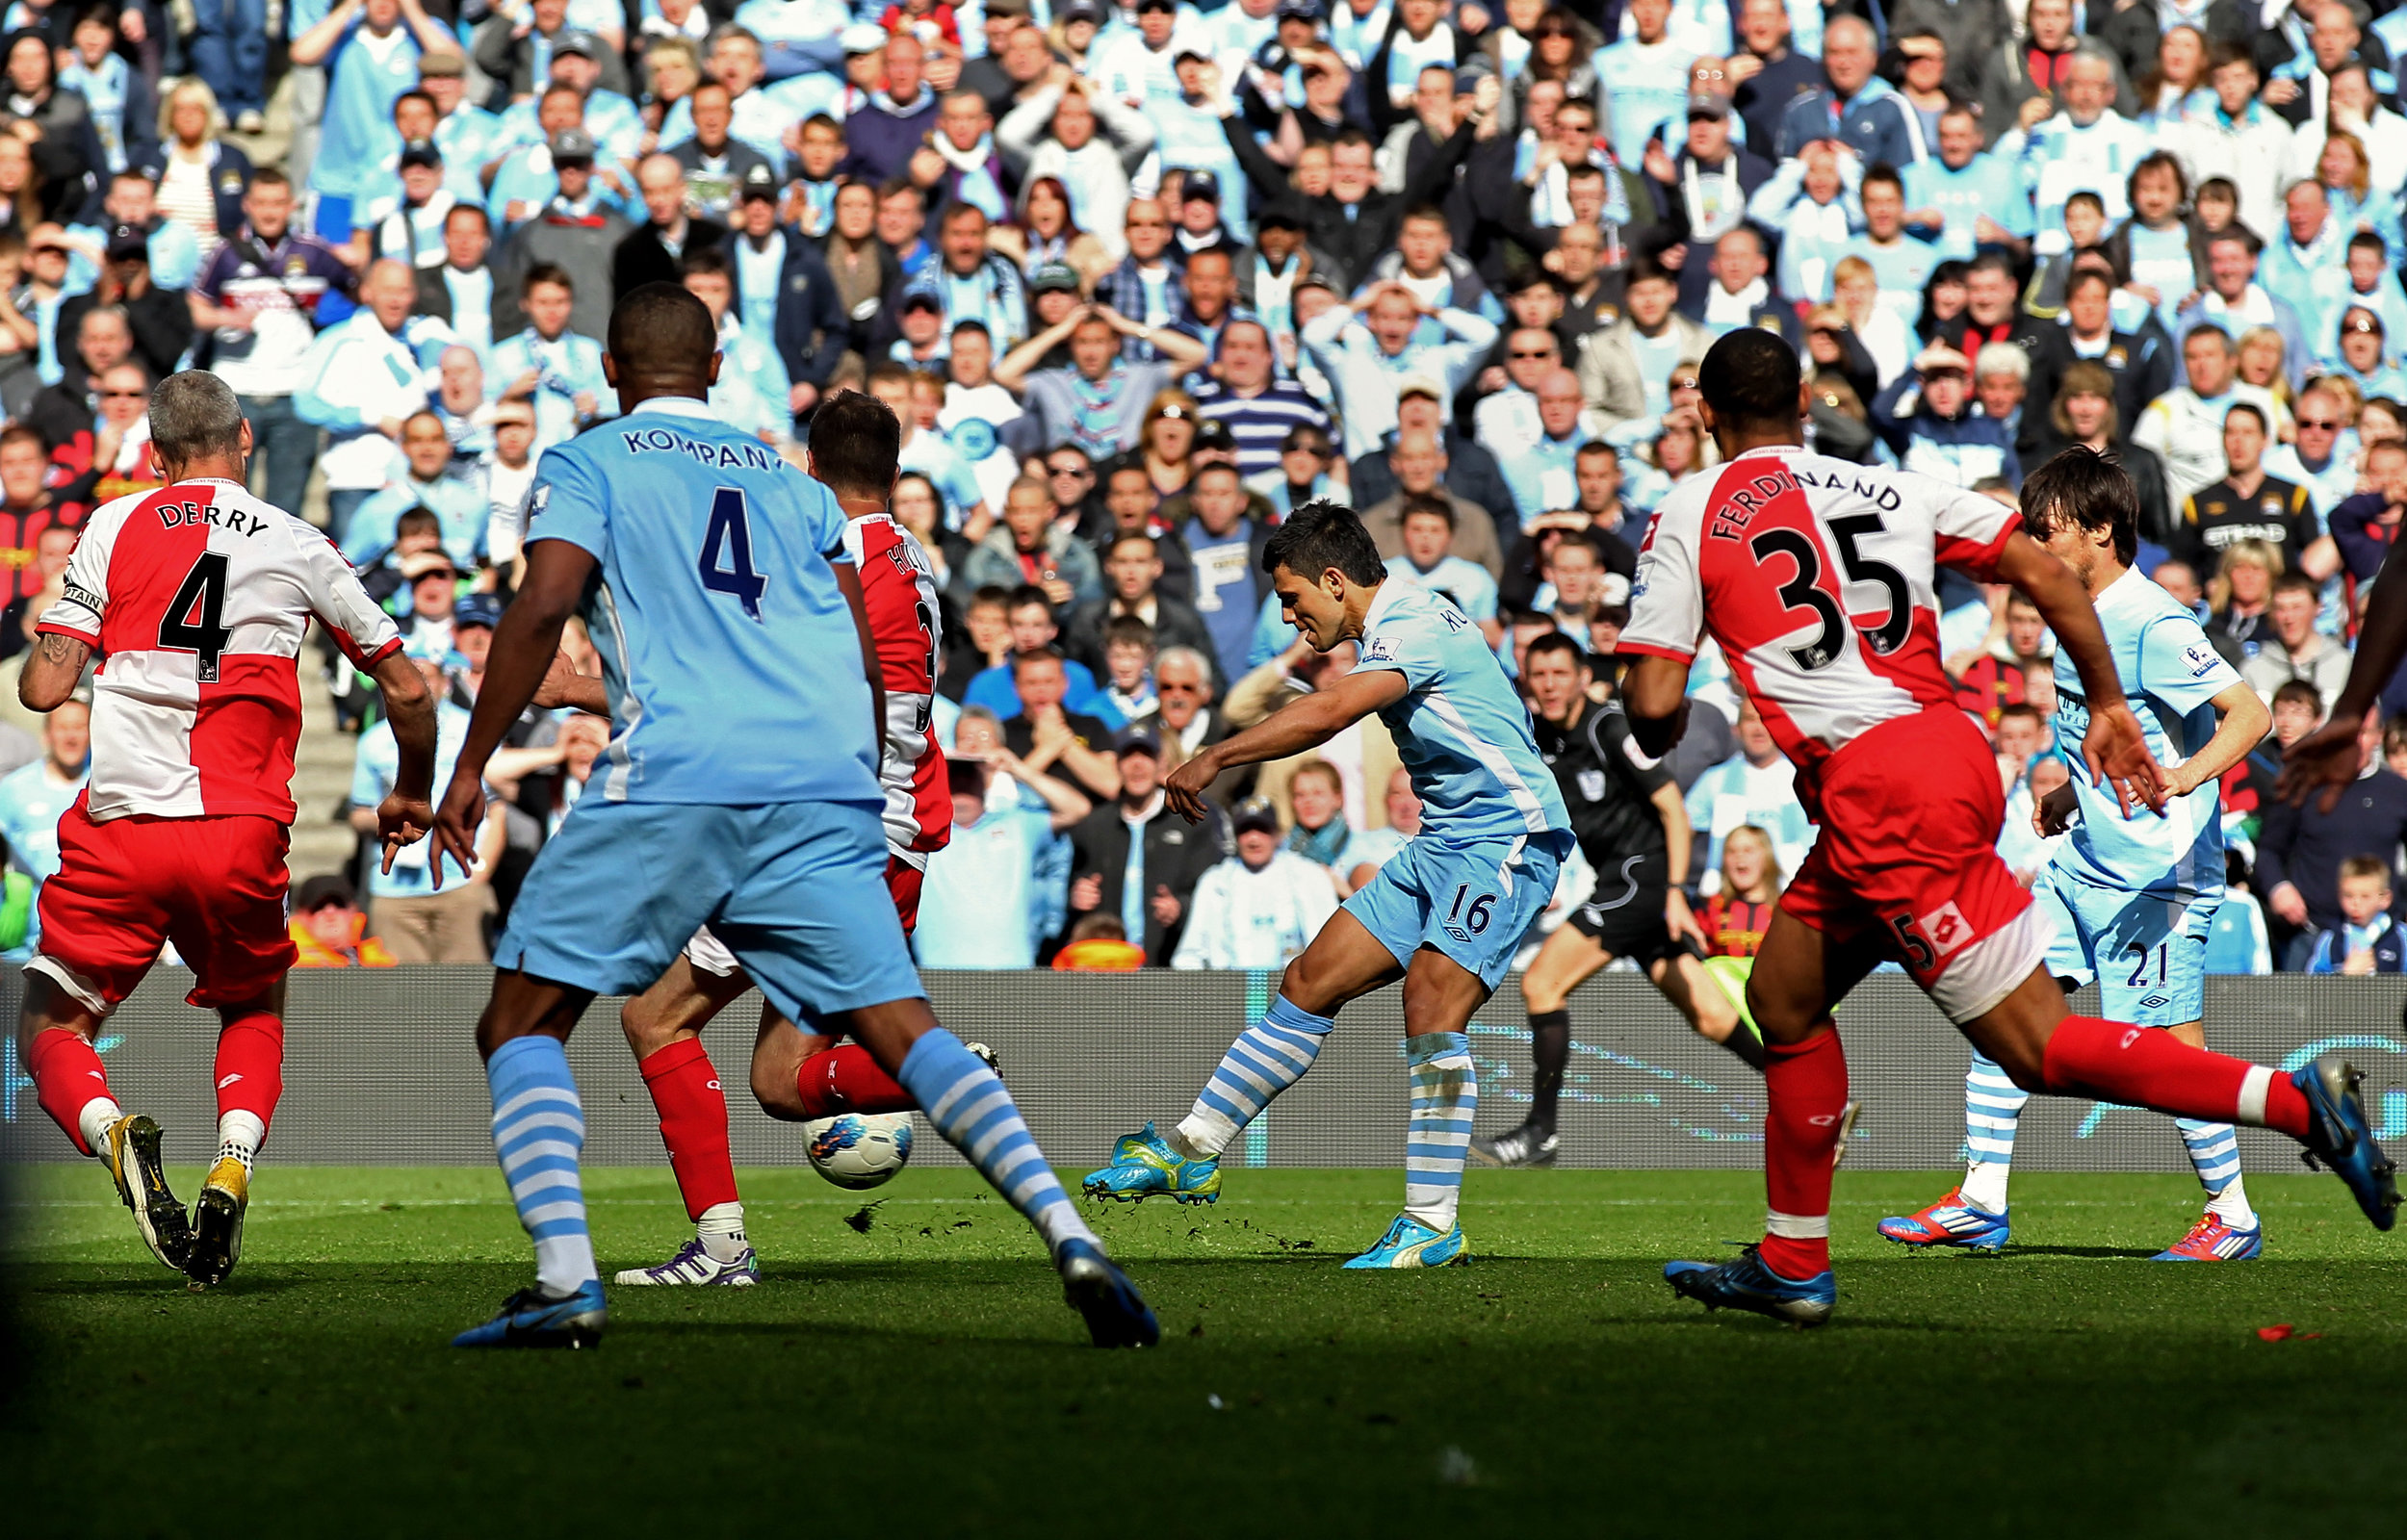  Manchester City’s Sergio Agüero, final day of the 2011–12 season. (Alex Livesey/Getty Images) 